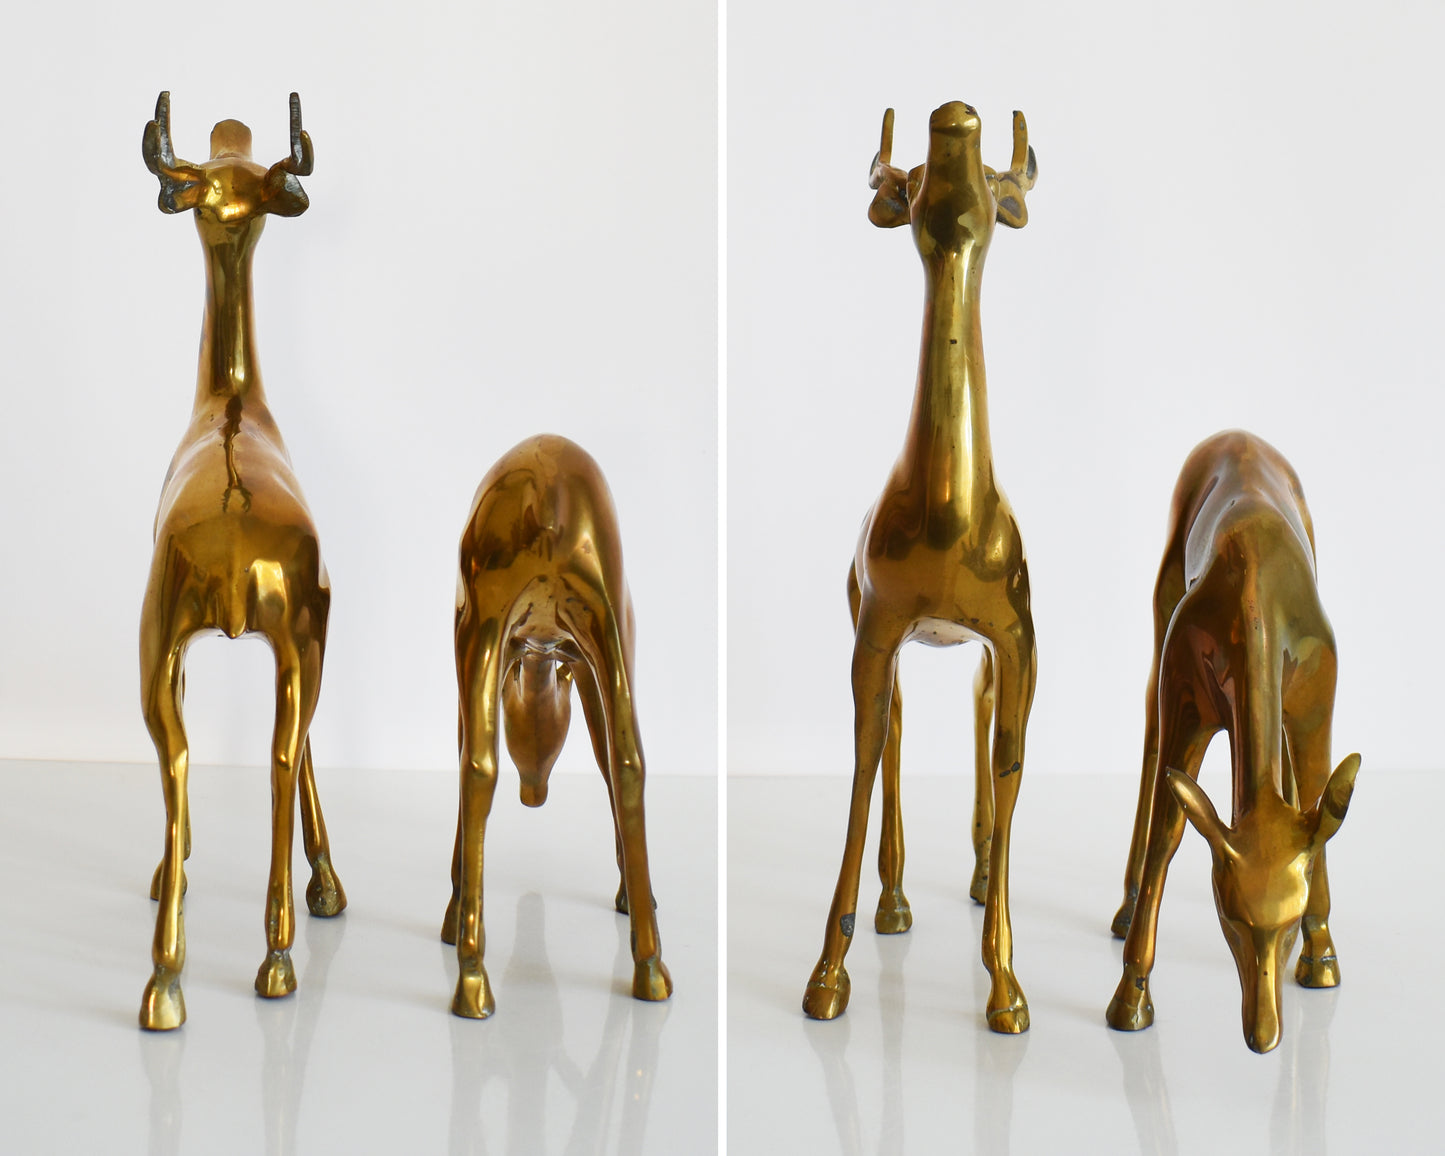 Front and back view of a pair of two large vintage brass deer figurines. One buck and one doe make up this collection, with the buck standing upright displaying his antlers and the doe is grazing on the ground.